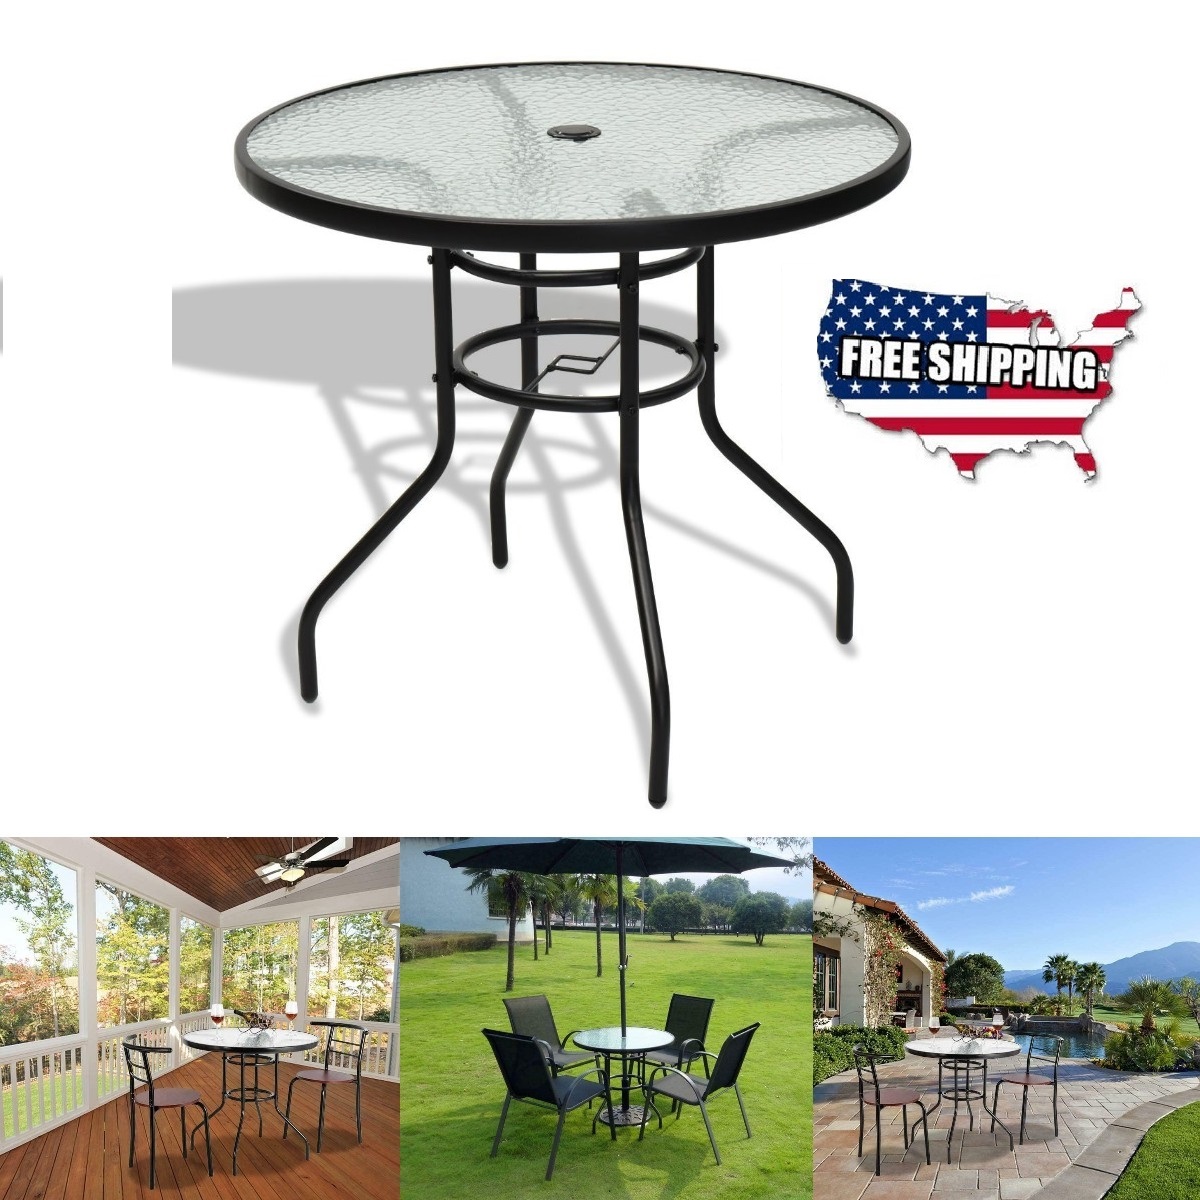 Goorabbit Outdoor Table With Umbrella Hole,Outdoor Round Tempered Glass Table Patio Metal Frame Dining Table, All Weather Outside Table for Garden,31.5x31.5x28.3",Black - image 1 of 9